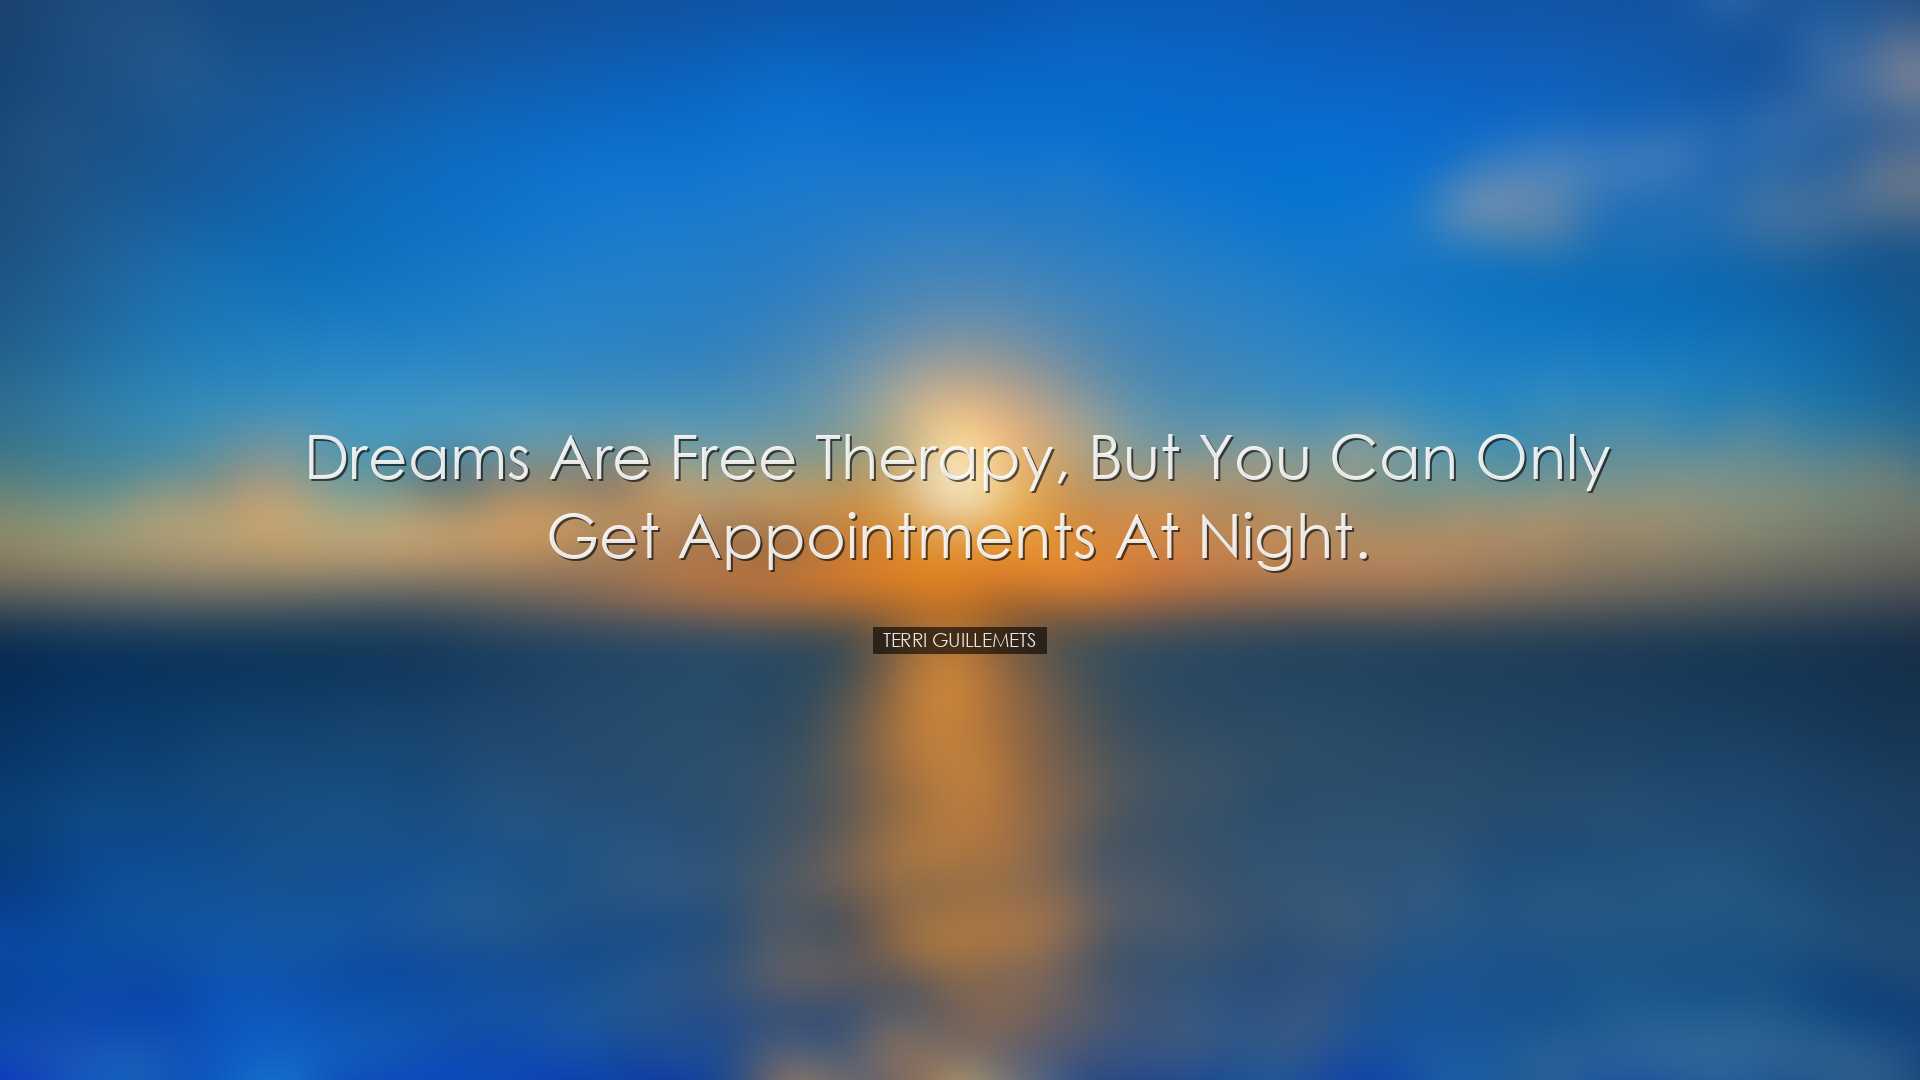 Dreams are free therapy, but you can only get appointments at nigh